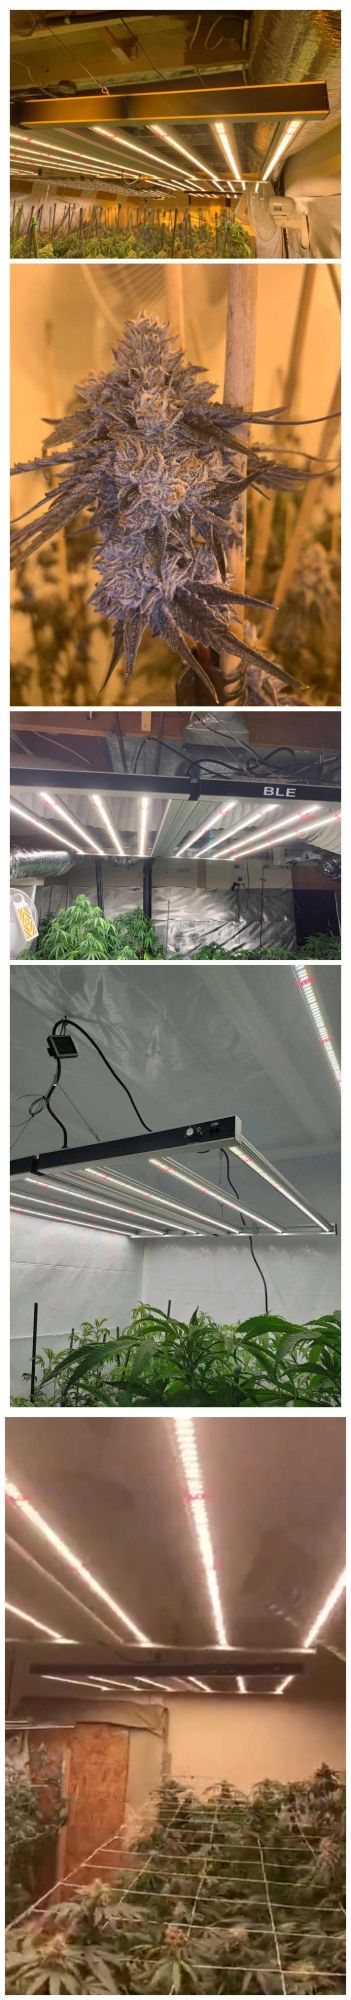 BLE Best China Supplier Horticulture Greenhouse Project Solution High Ppfd Good Yiled Samsung 301b LED Grow Light